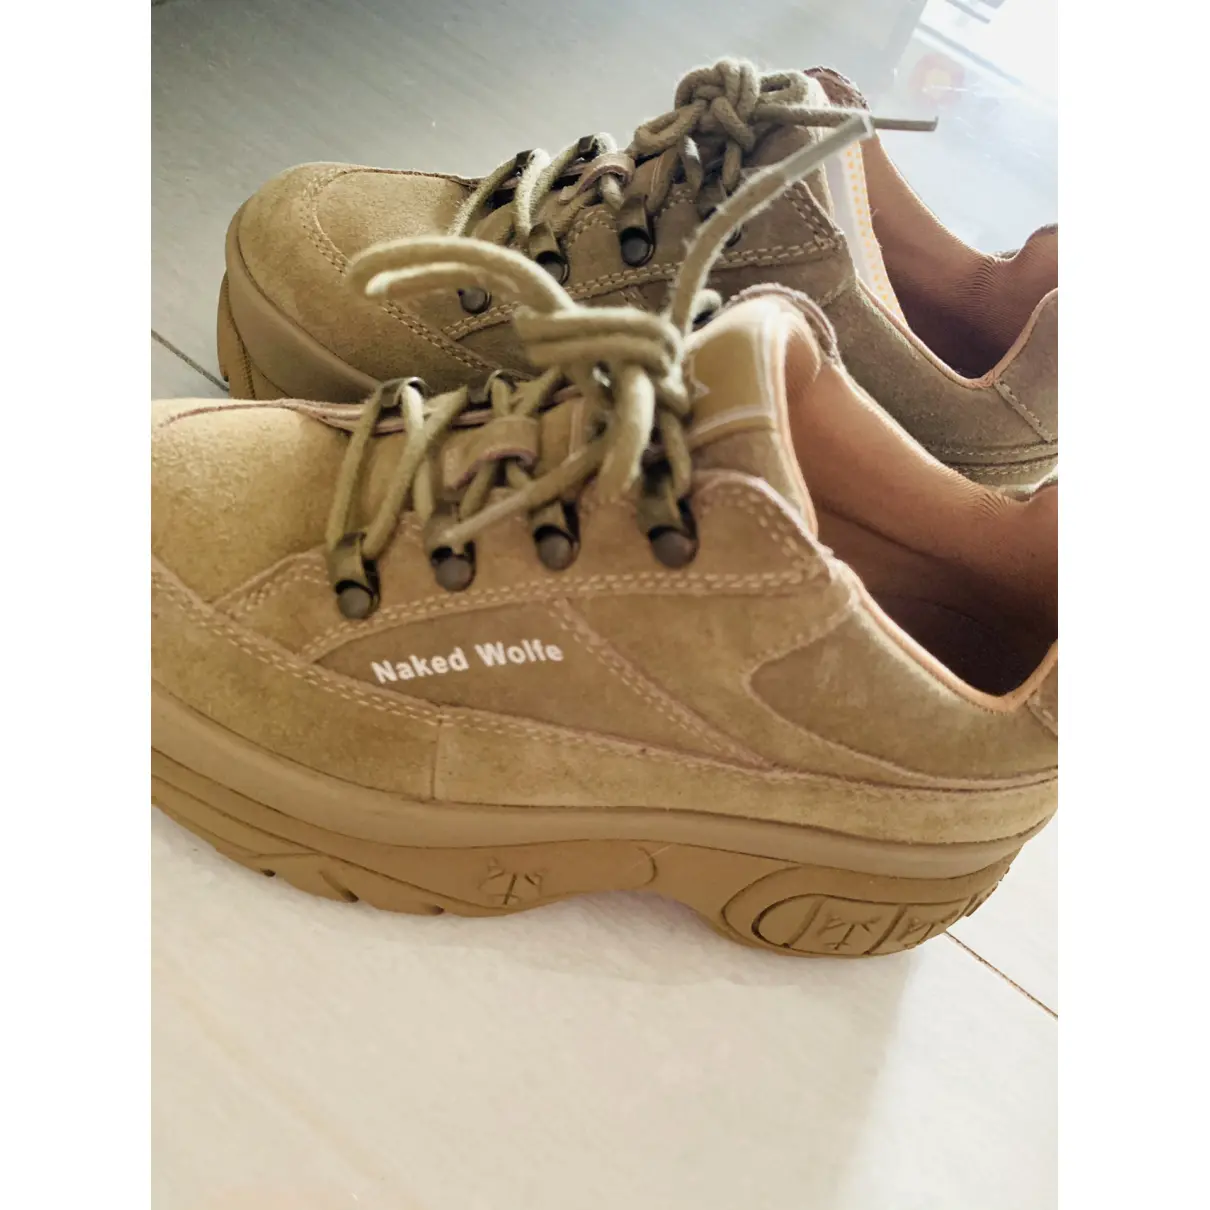 Buy Naked Wolfe Trainers online